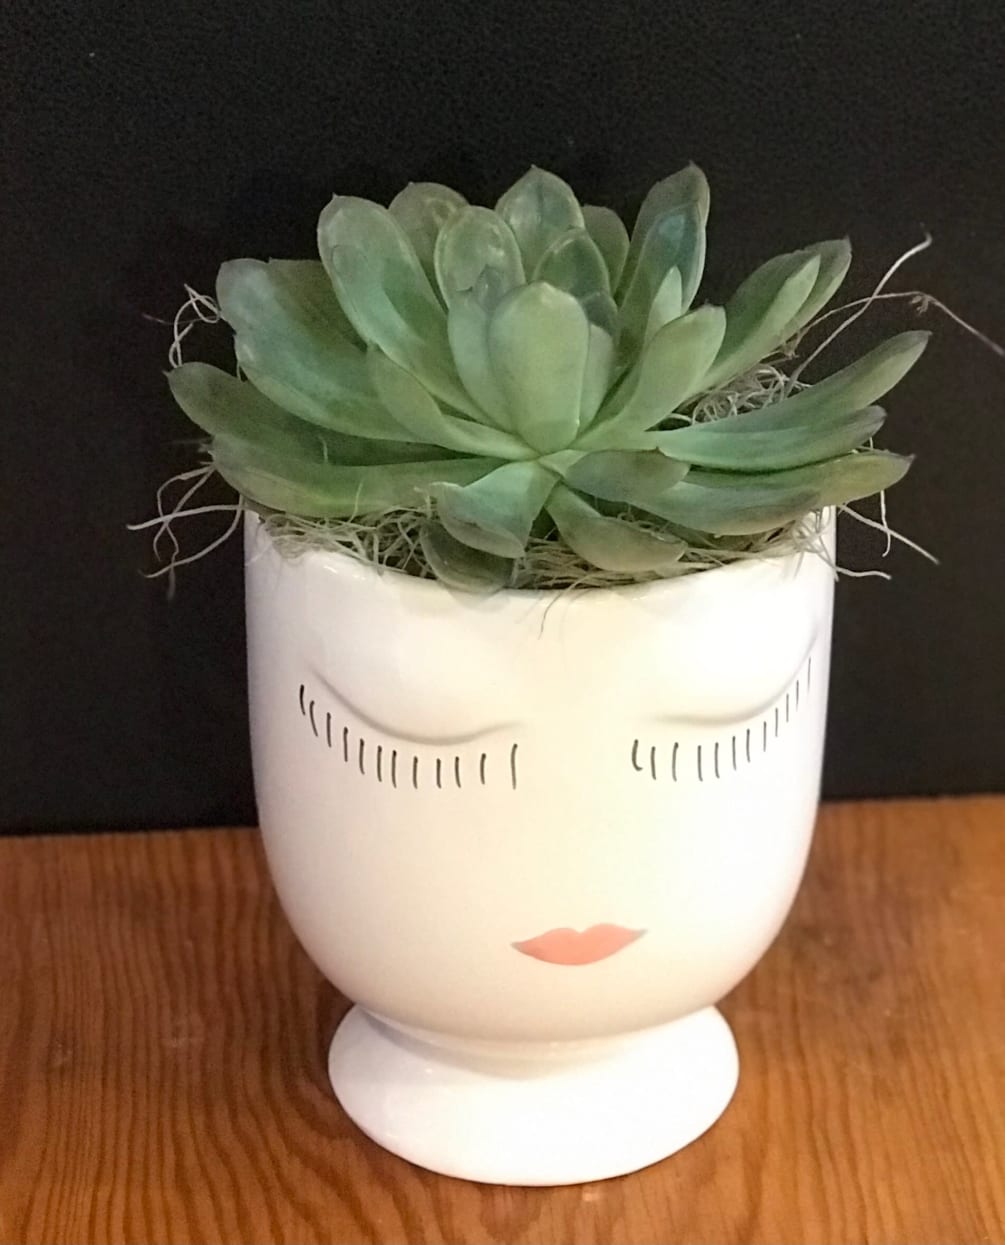 She&rsquo;s so Marvelous!   Our selfie vase filled with a succulent